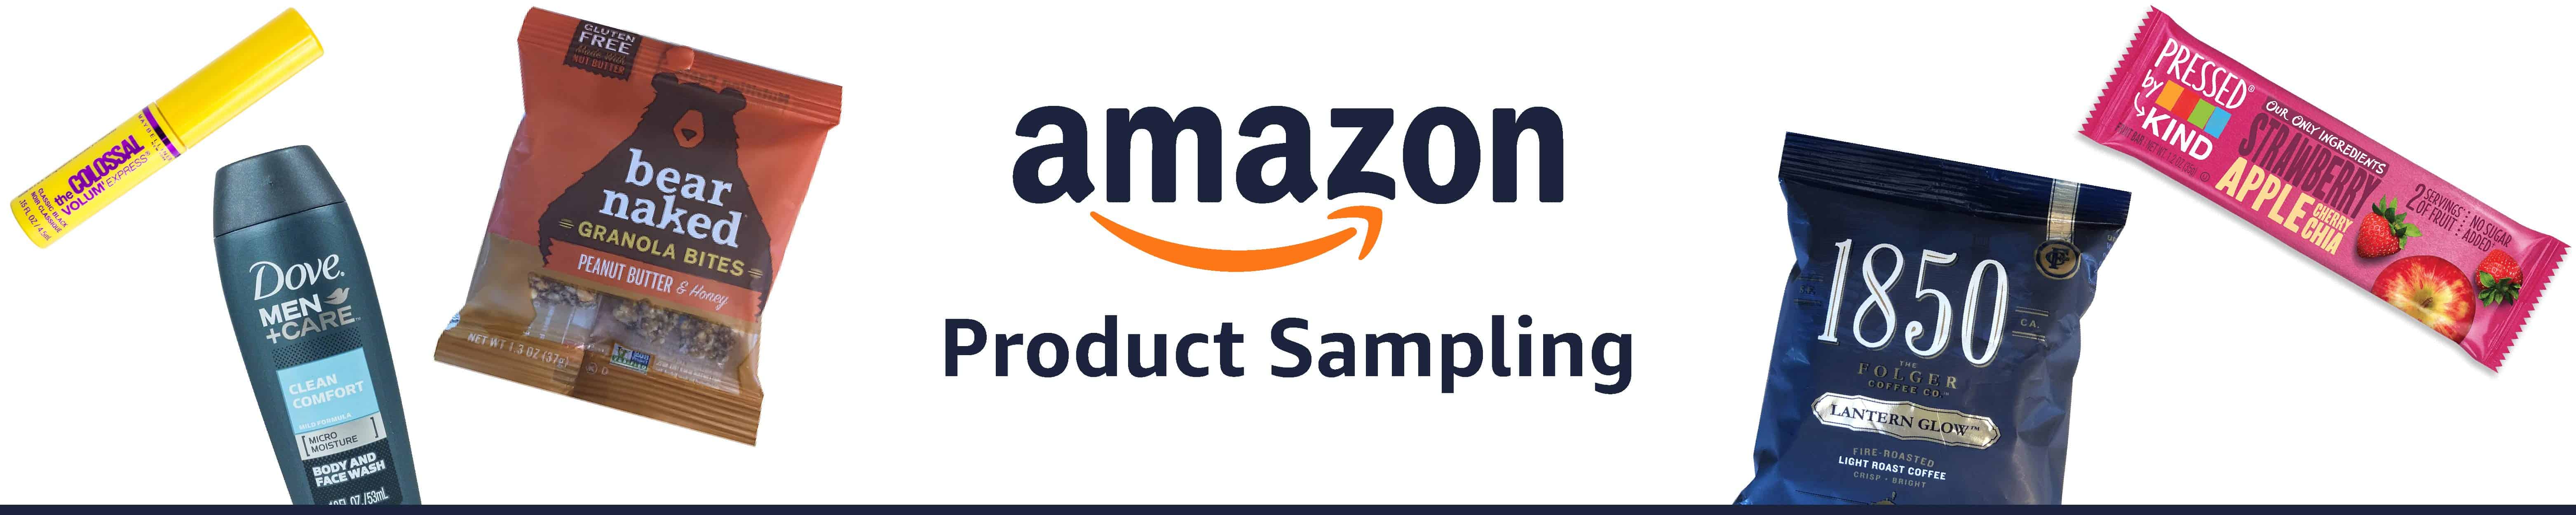 Receive FREE Samples from Amazon